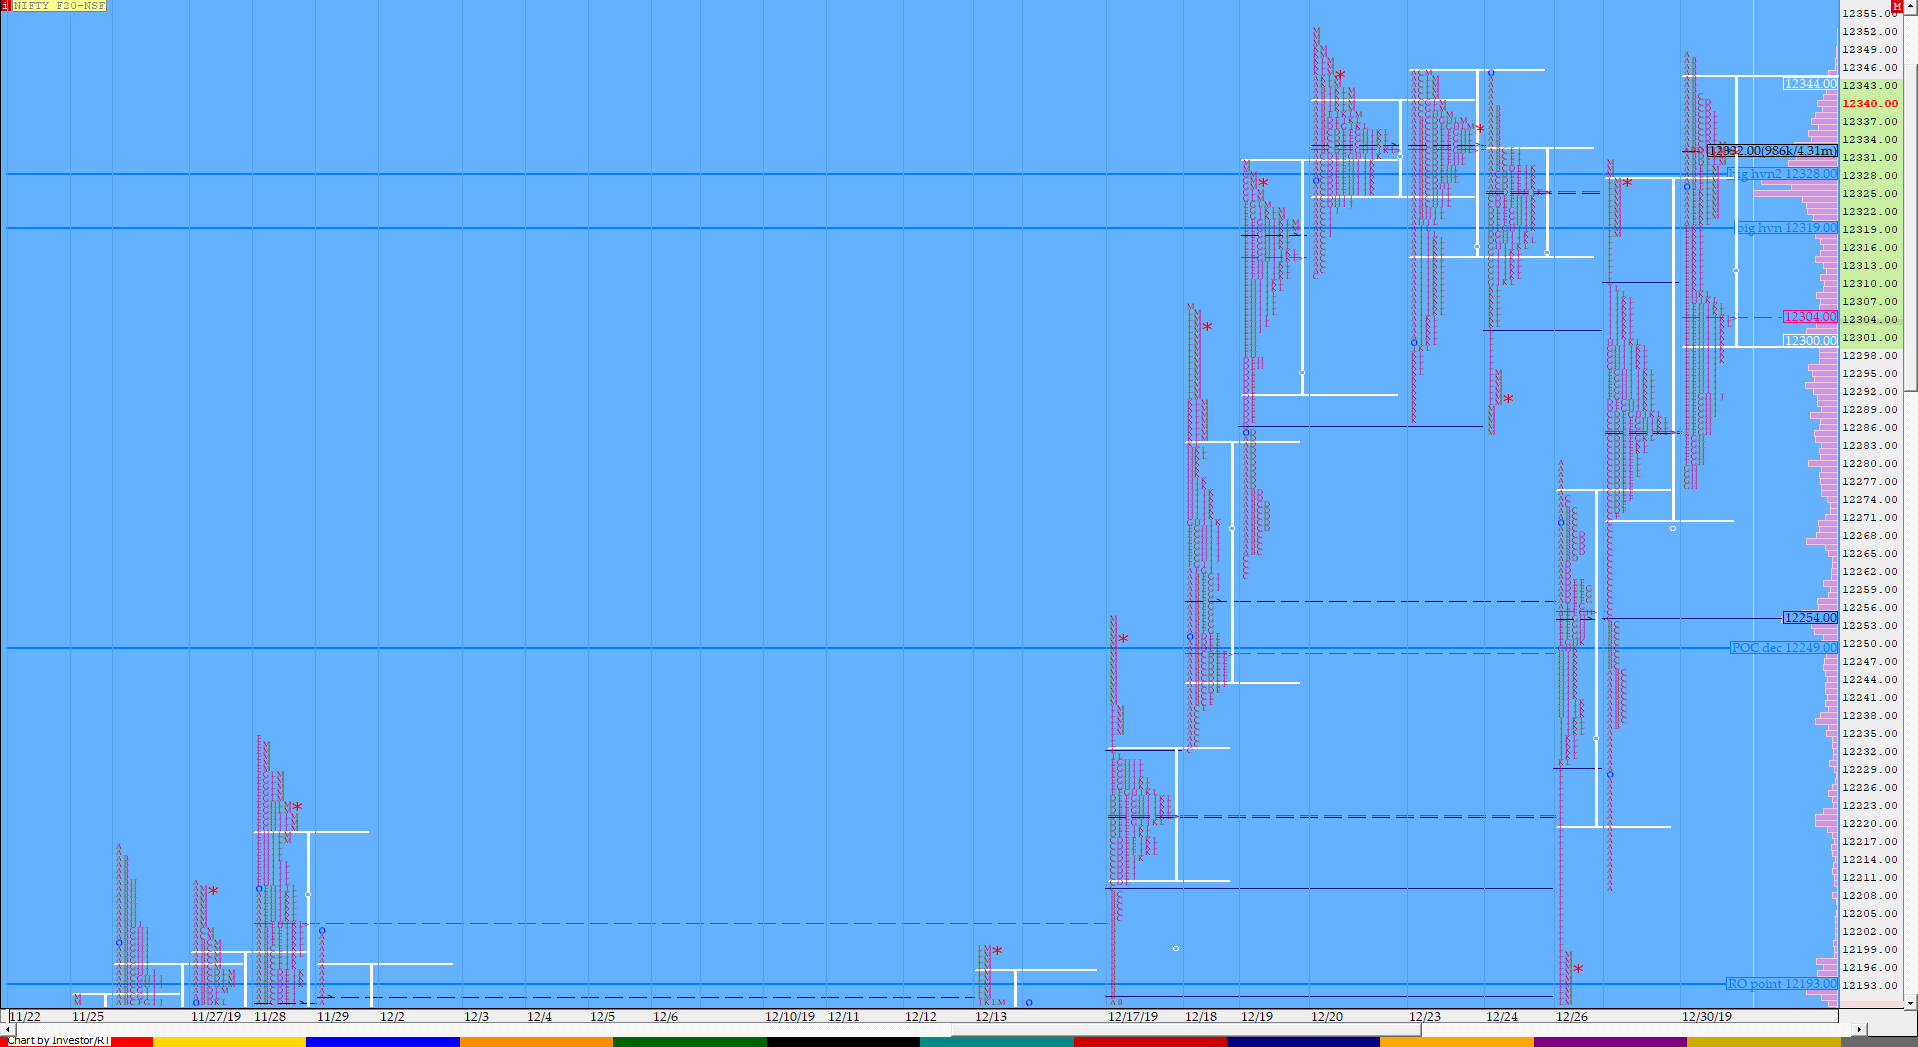 Nf Compo1 17 Market Profile Analysis Dated 30Th December Banknifty Futures, Charts, Day Trading, Intraday Trading, Intraday Trading Strategies, Market Profile, Market Profile Trading Strategies, Nifty Futures, Order Flow Analysis, Support And Resistance, Technical Analysis, Trading Strategies, Volume Profile Trading